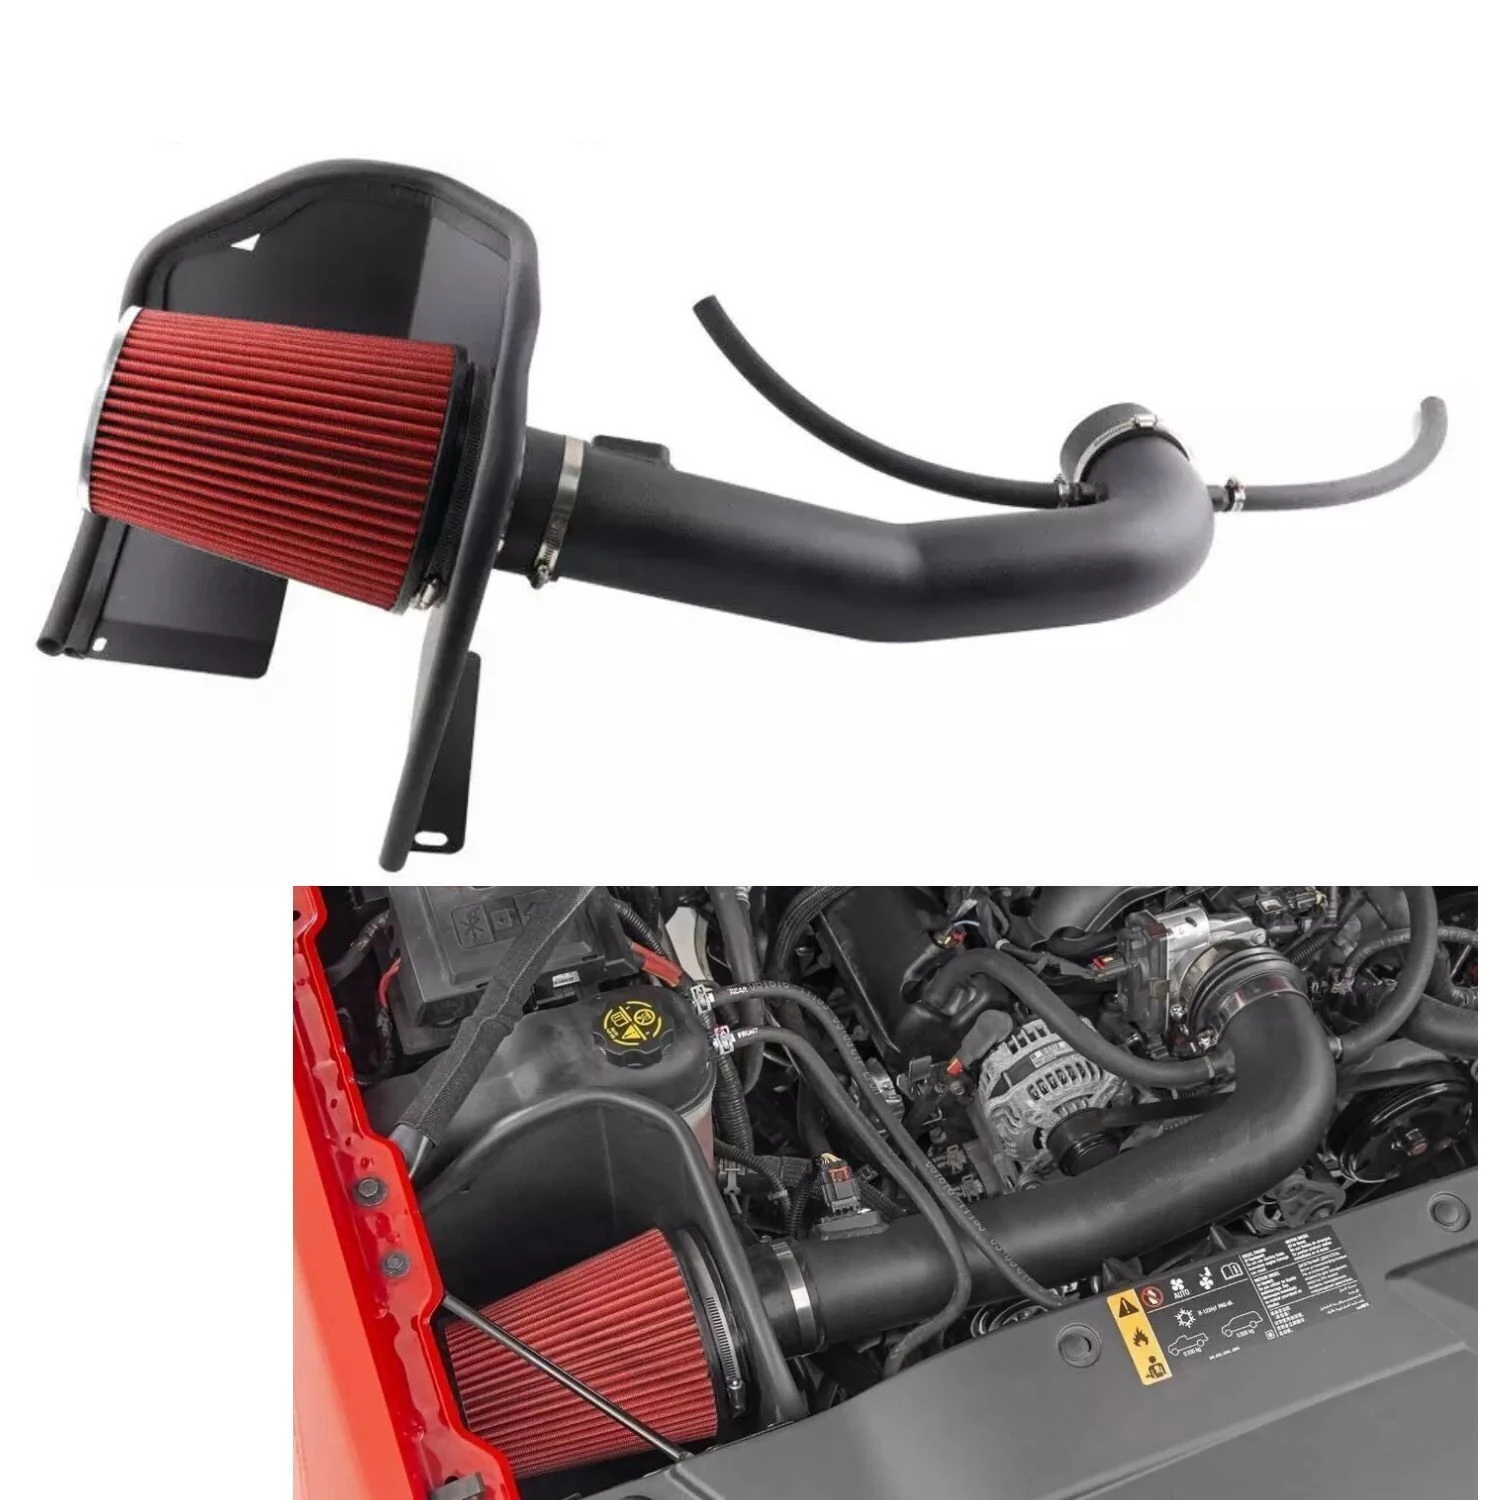 

Black Cold Air Intake System w/ Filter Shield for 14-18 Chevy GMC 1500 5.3L 6.2L